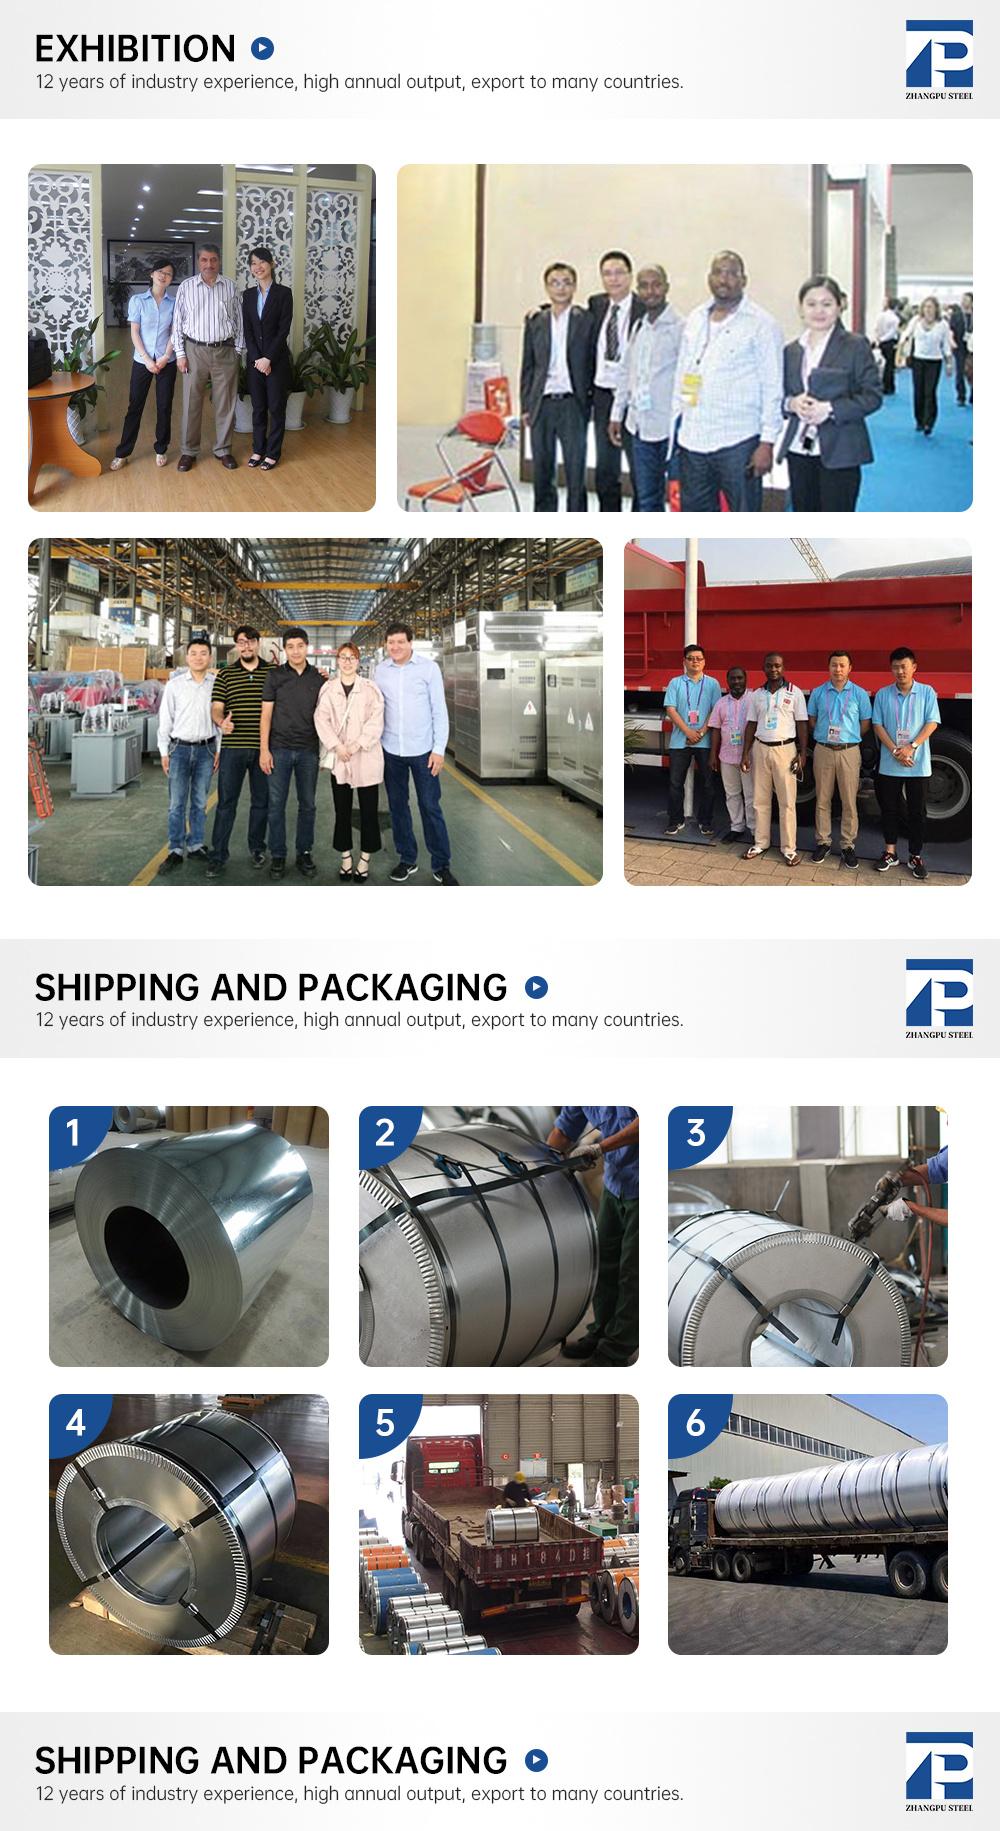 New Product Printed PPGI/ Perpainted Galvanized Steel Coils/Color Coated Steel Coil Price